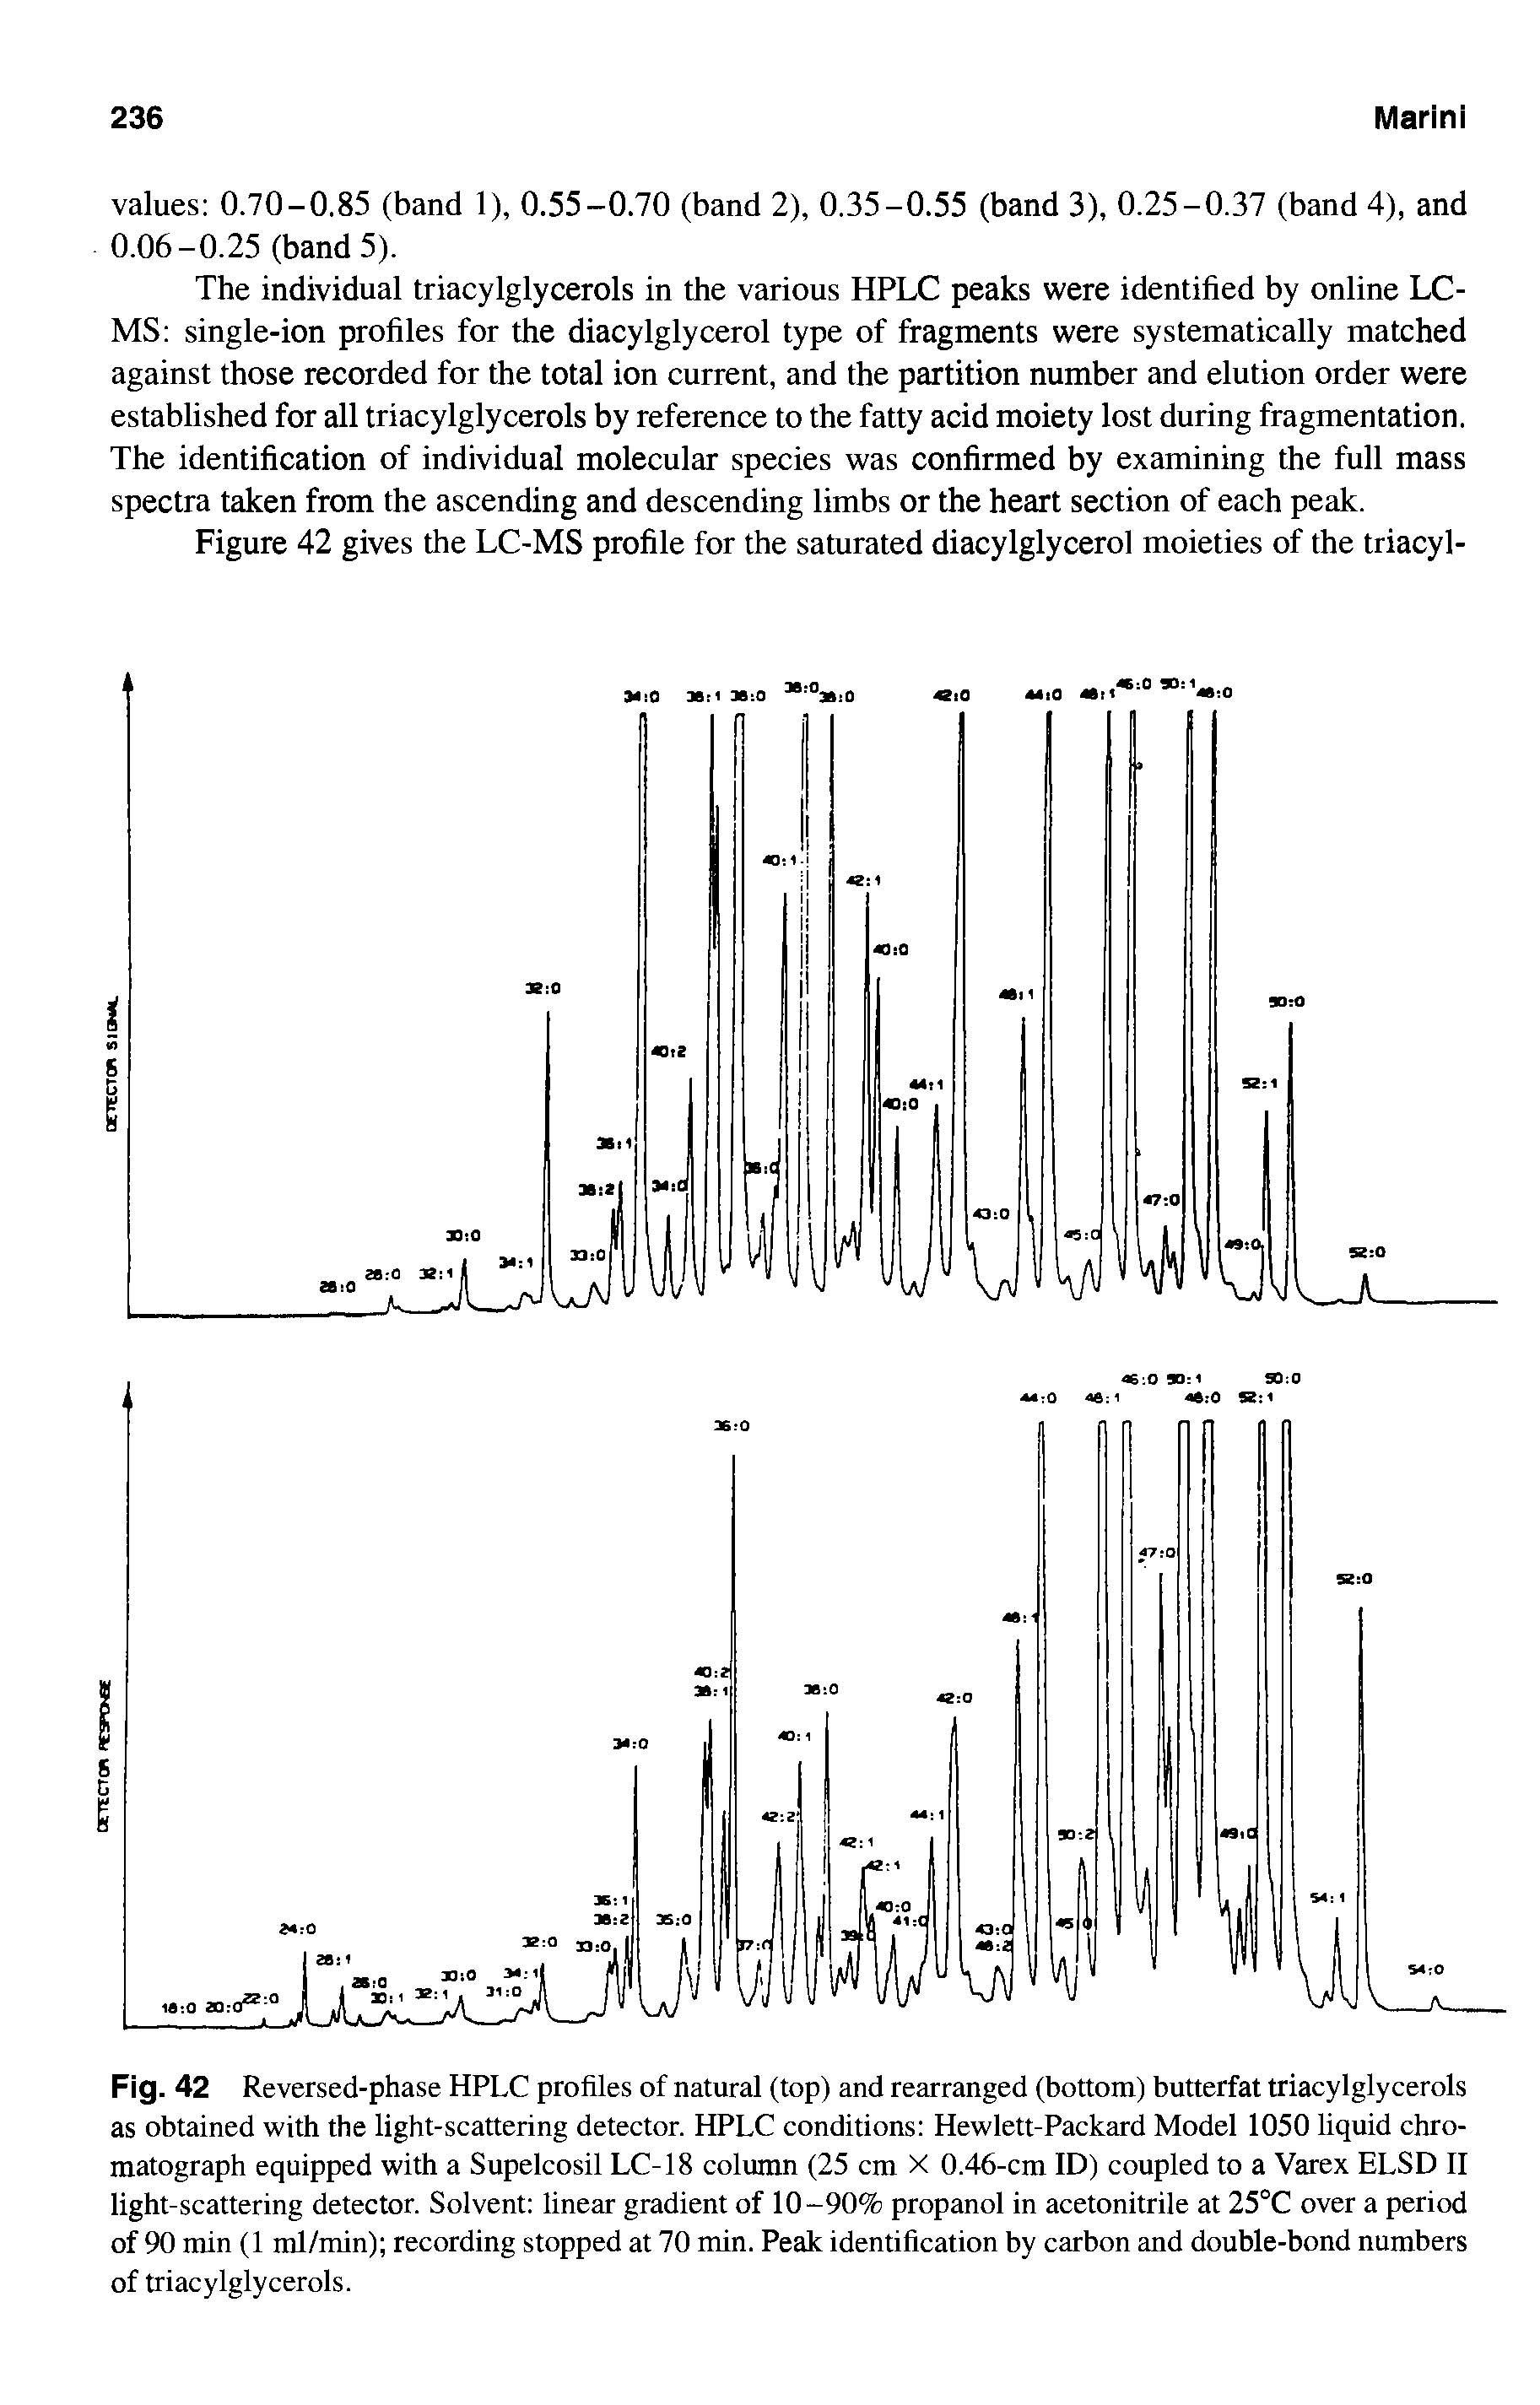 Fig. 42 Reversed-phase HPLC profiles of natural (top) and rearranged (bottom) butterfat triacylglycerols as obtained with the light-scattering detector. HPLC conditions Hewlett-Packard Model 1050 liquid chromatograph equipped with a Supelcosil LC-18 column (25 cm X 0.46-cm ID) coupled to a Varex ELSD II light-scattering detector. Solvent linear gradient of 10-90% propanol in acetonitrile at 25°C over a period of 90 min (1 ml/min) recording stopped at 70 min. Peak identification by carbon and double-bond numbers of triacylglycerols.